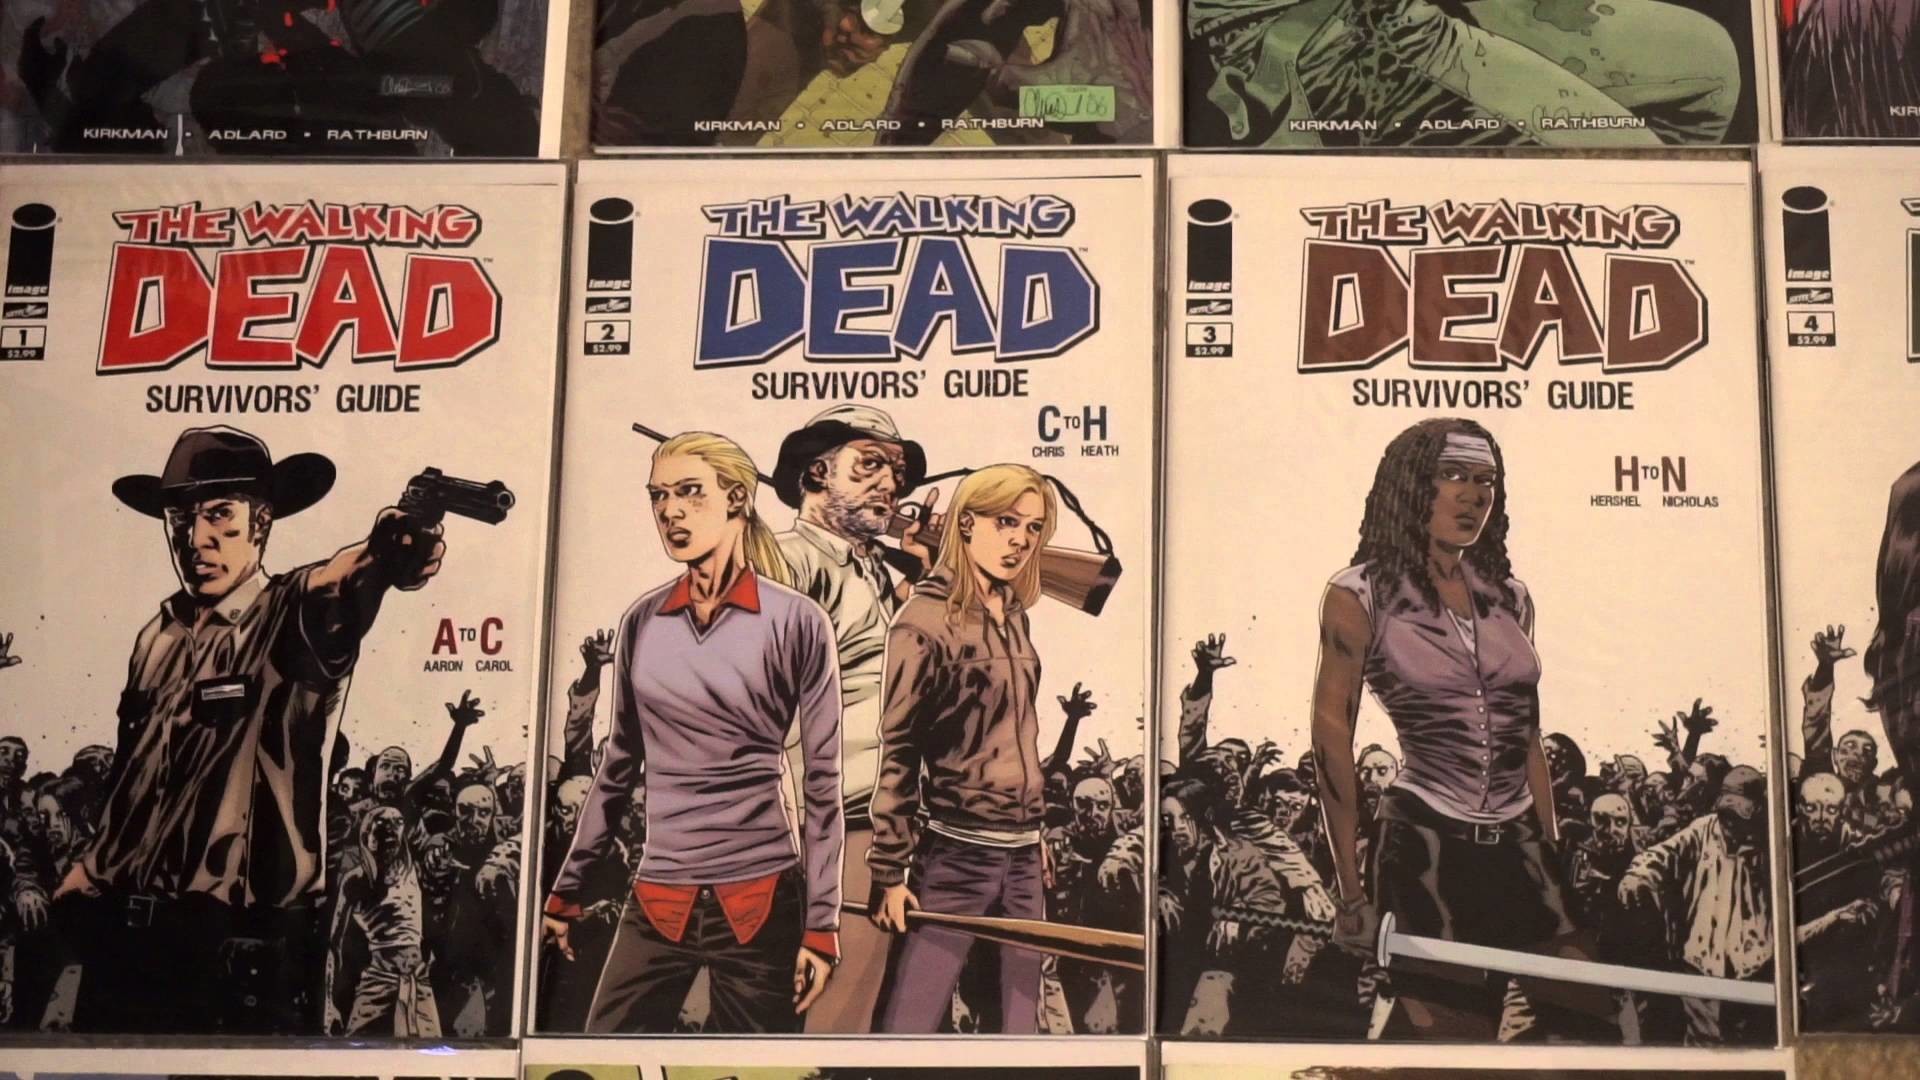 1920x1080 The Walking Dead Comic Book Collection - 2016 (Part 3)